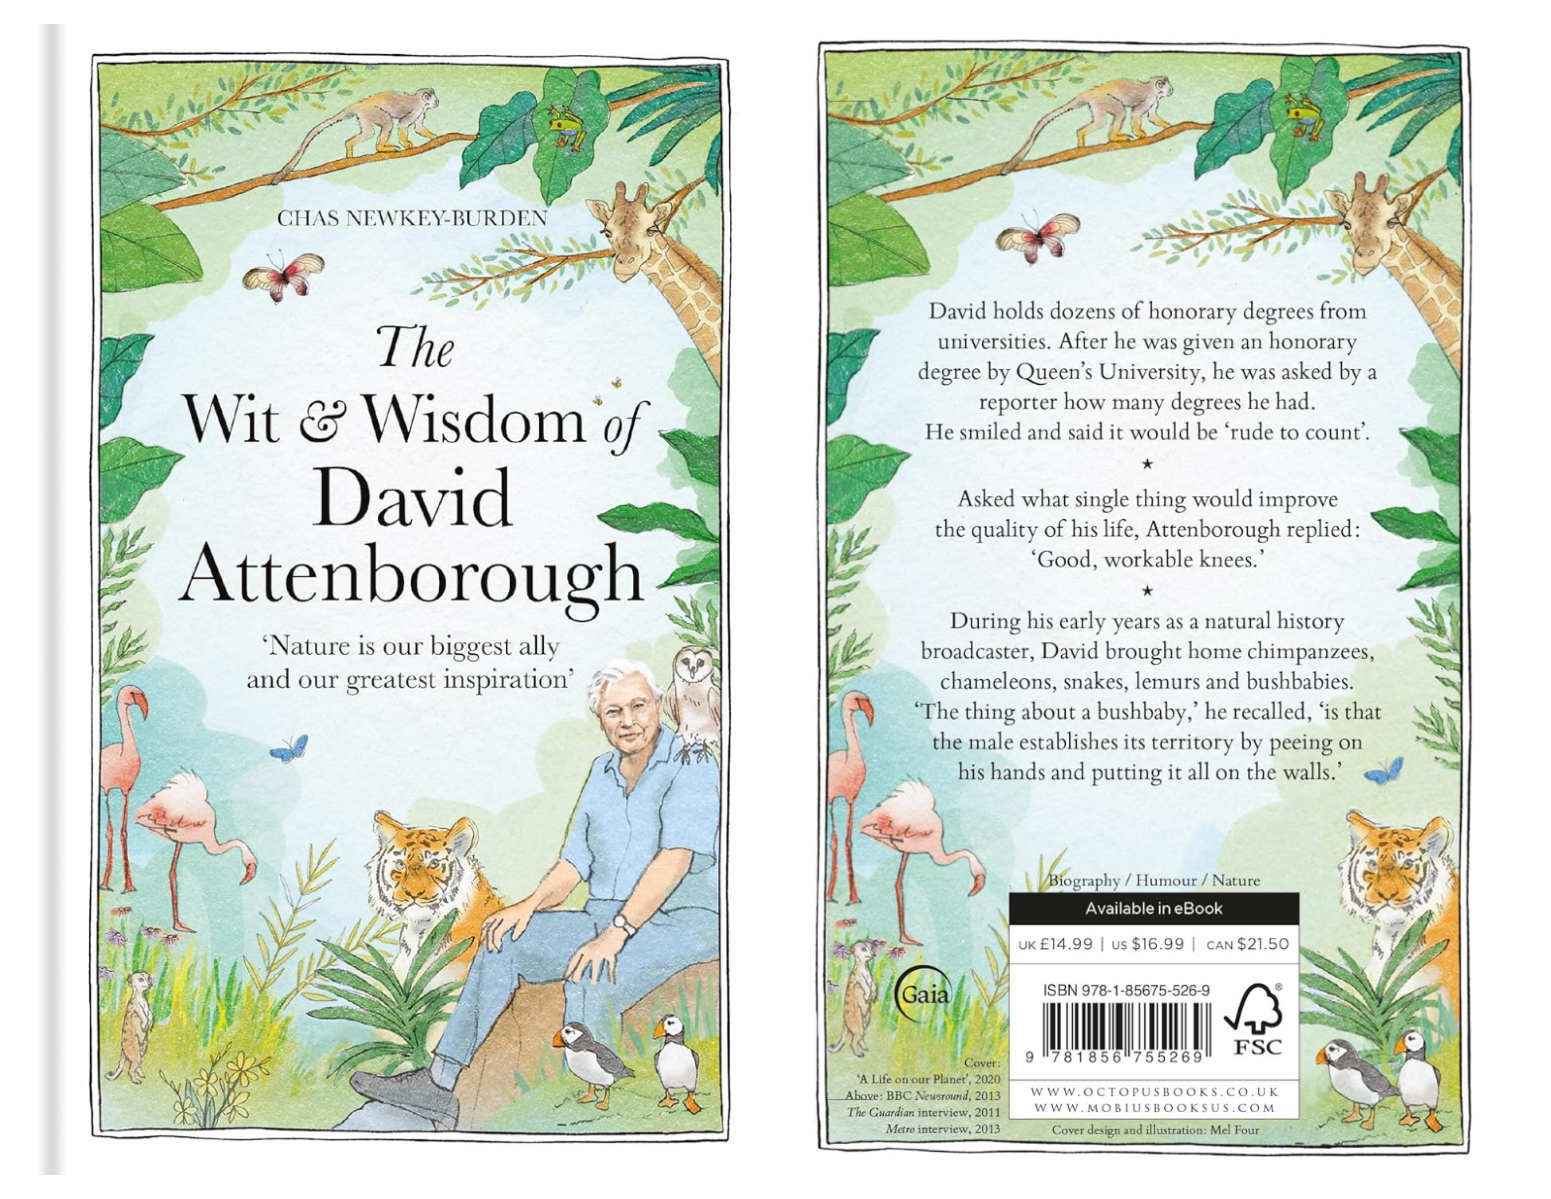 The wisdom and wit of david attenbourgh cover